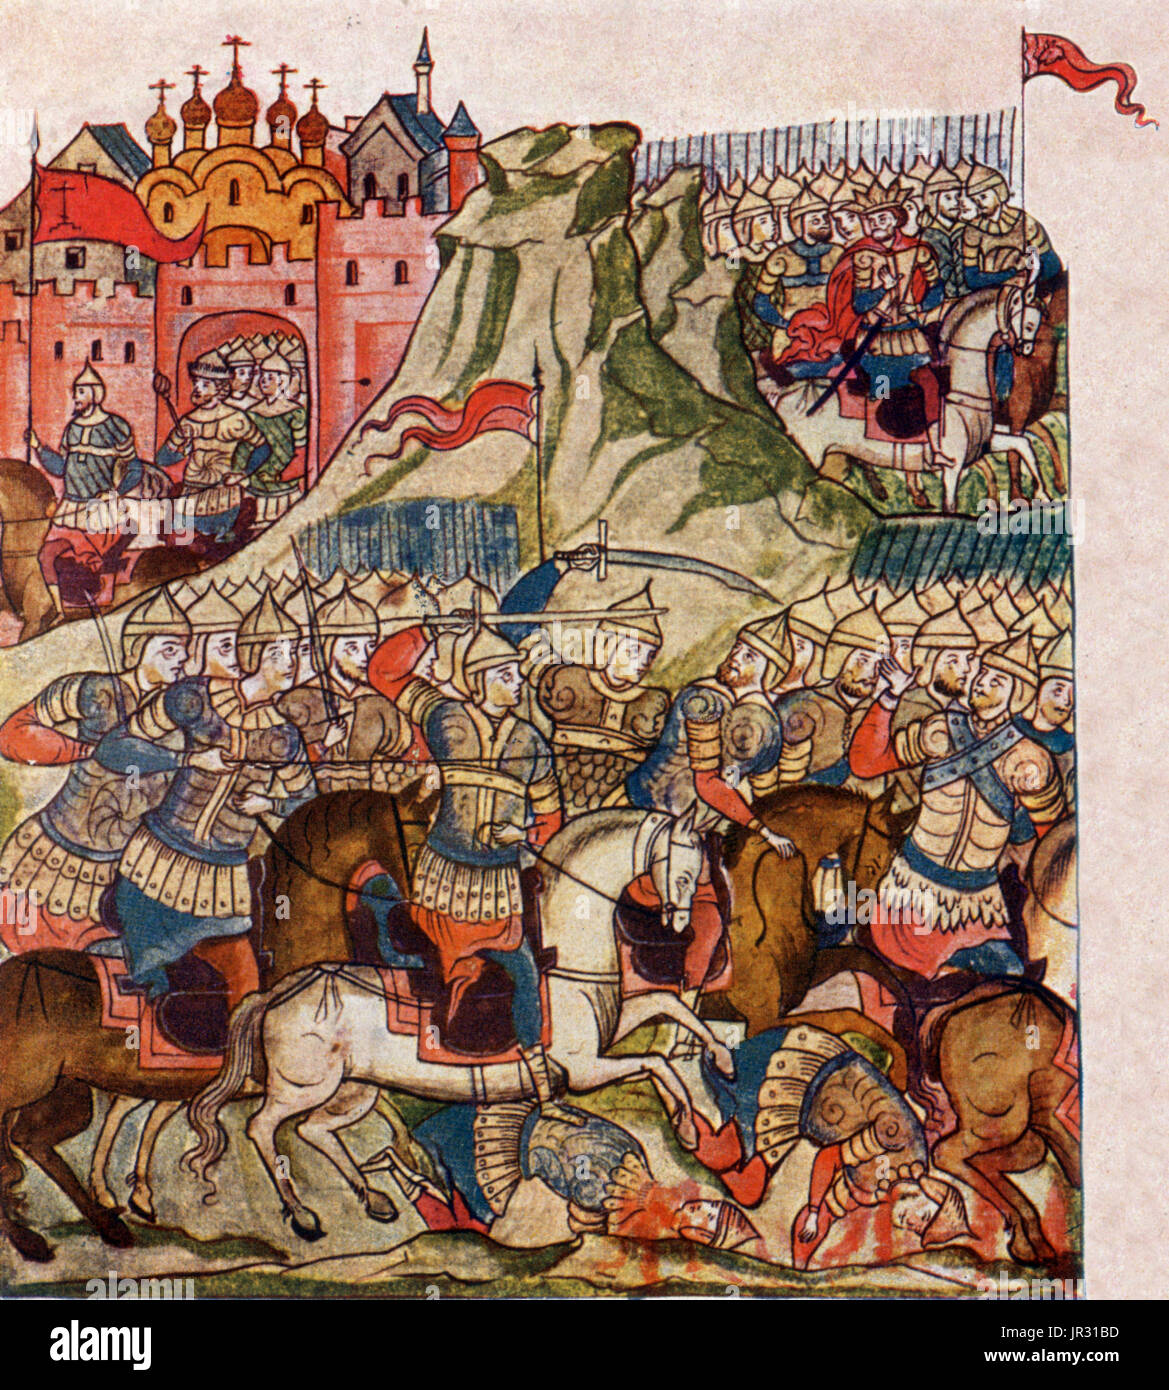 The Battle of Kulikovo was fought between the armies of the Golden Horde under the command of Mamai, and various Russian principalities under the united command of Prince Dmitri of Moscow. The battle took place on September 8, 1380, at the Kulikovo Field near the Don River (now Tula Oblast, Russia). After approximately three hours of battle (from noon to 3pm) the Russian forces were successful, despite great casualties, in holding off the Horde's attack. The cavalry of Vladimir, Prince of Serpukhov (Dmitri's cousin), led by Prince Bobrok (Prince Dmitri's brother-in-law), launched a surprise co Stock Photo